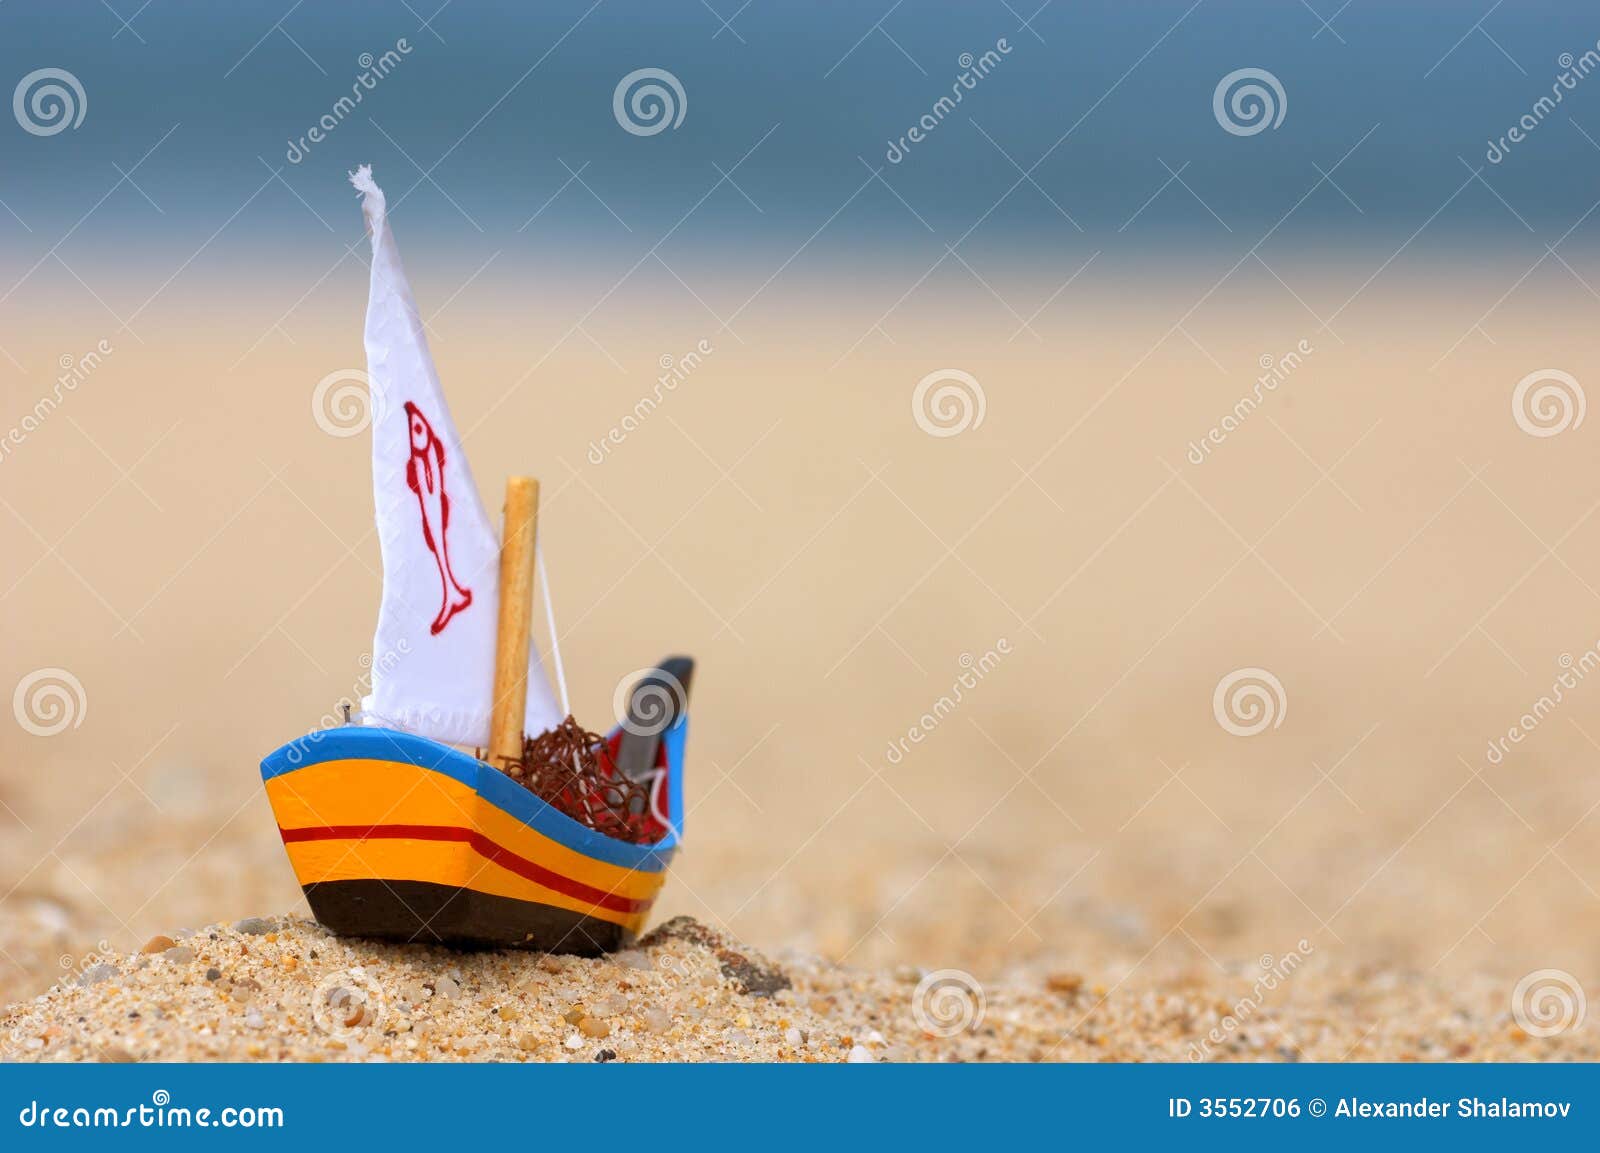 https://thumbs.dreamstime.com/z/small-wooden-fishing-boat-toy-3552706.jpg